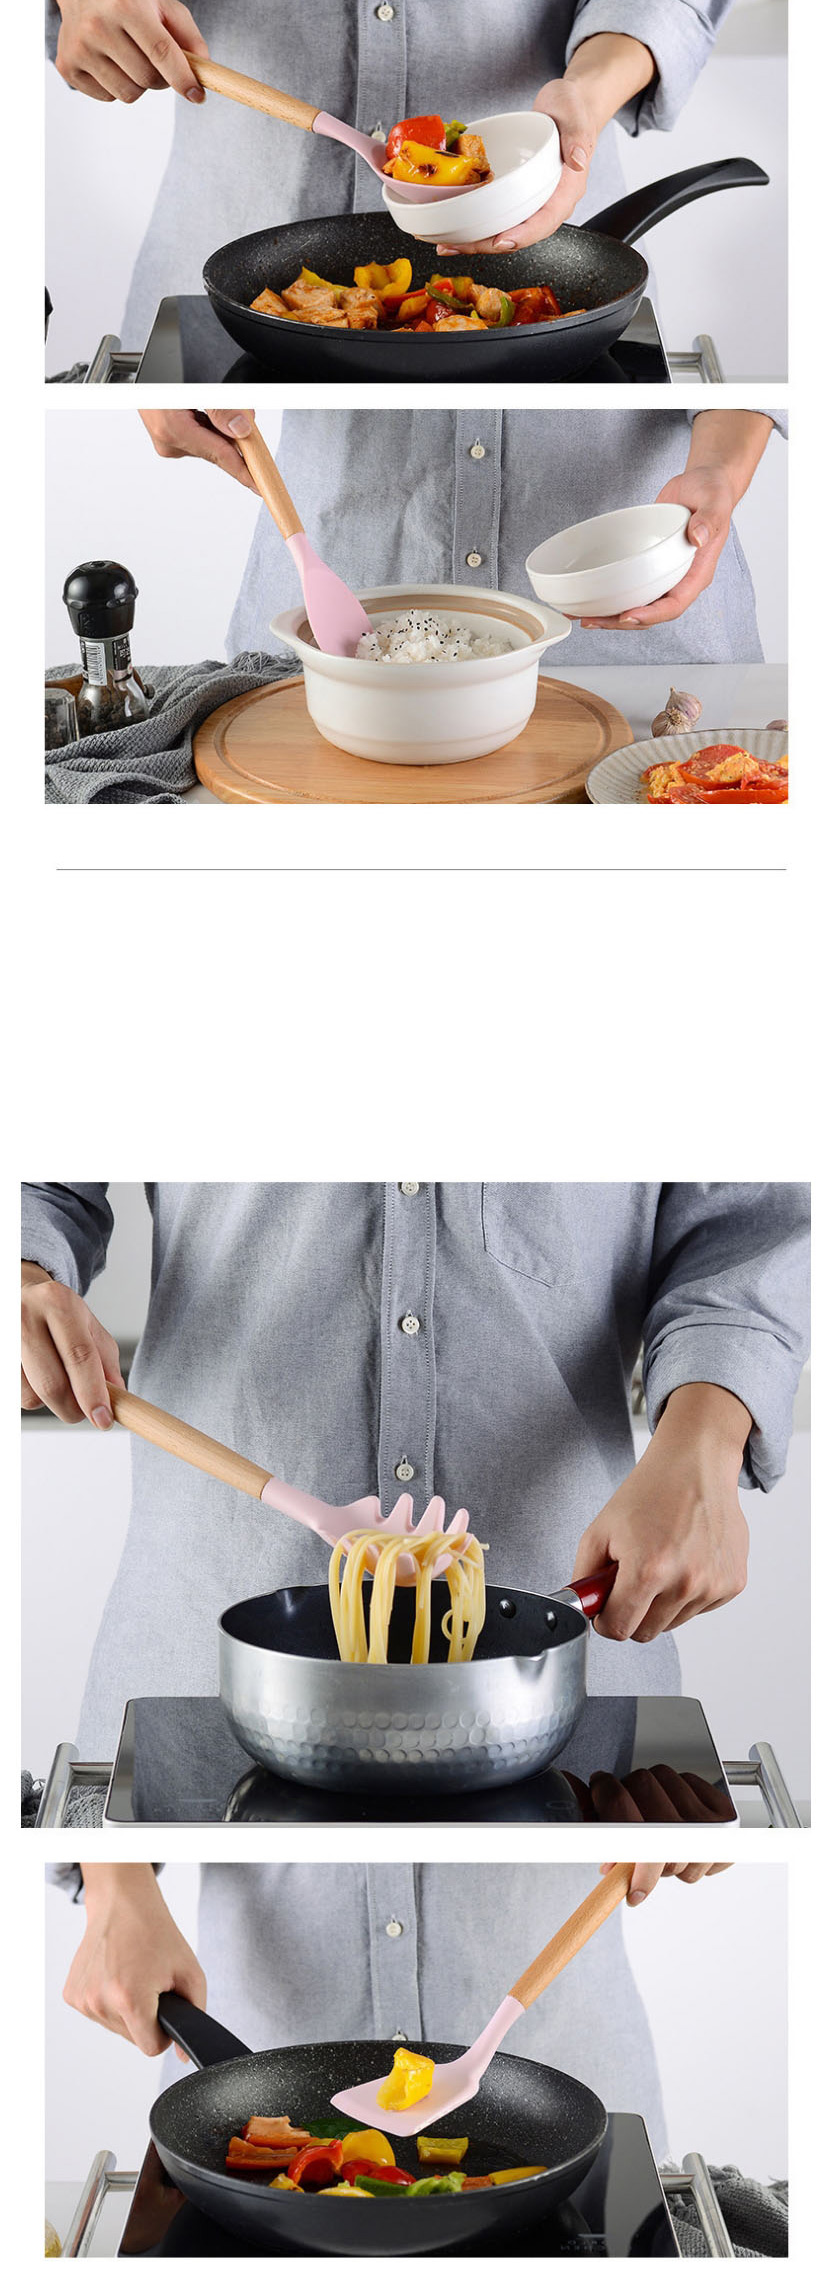 Fashion Food Pinch Pink Solid Wood Handle With Bucket And Silica Gel Kitchenware,Kitchen